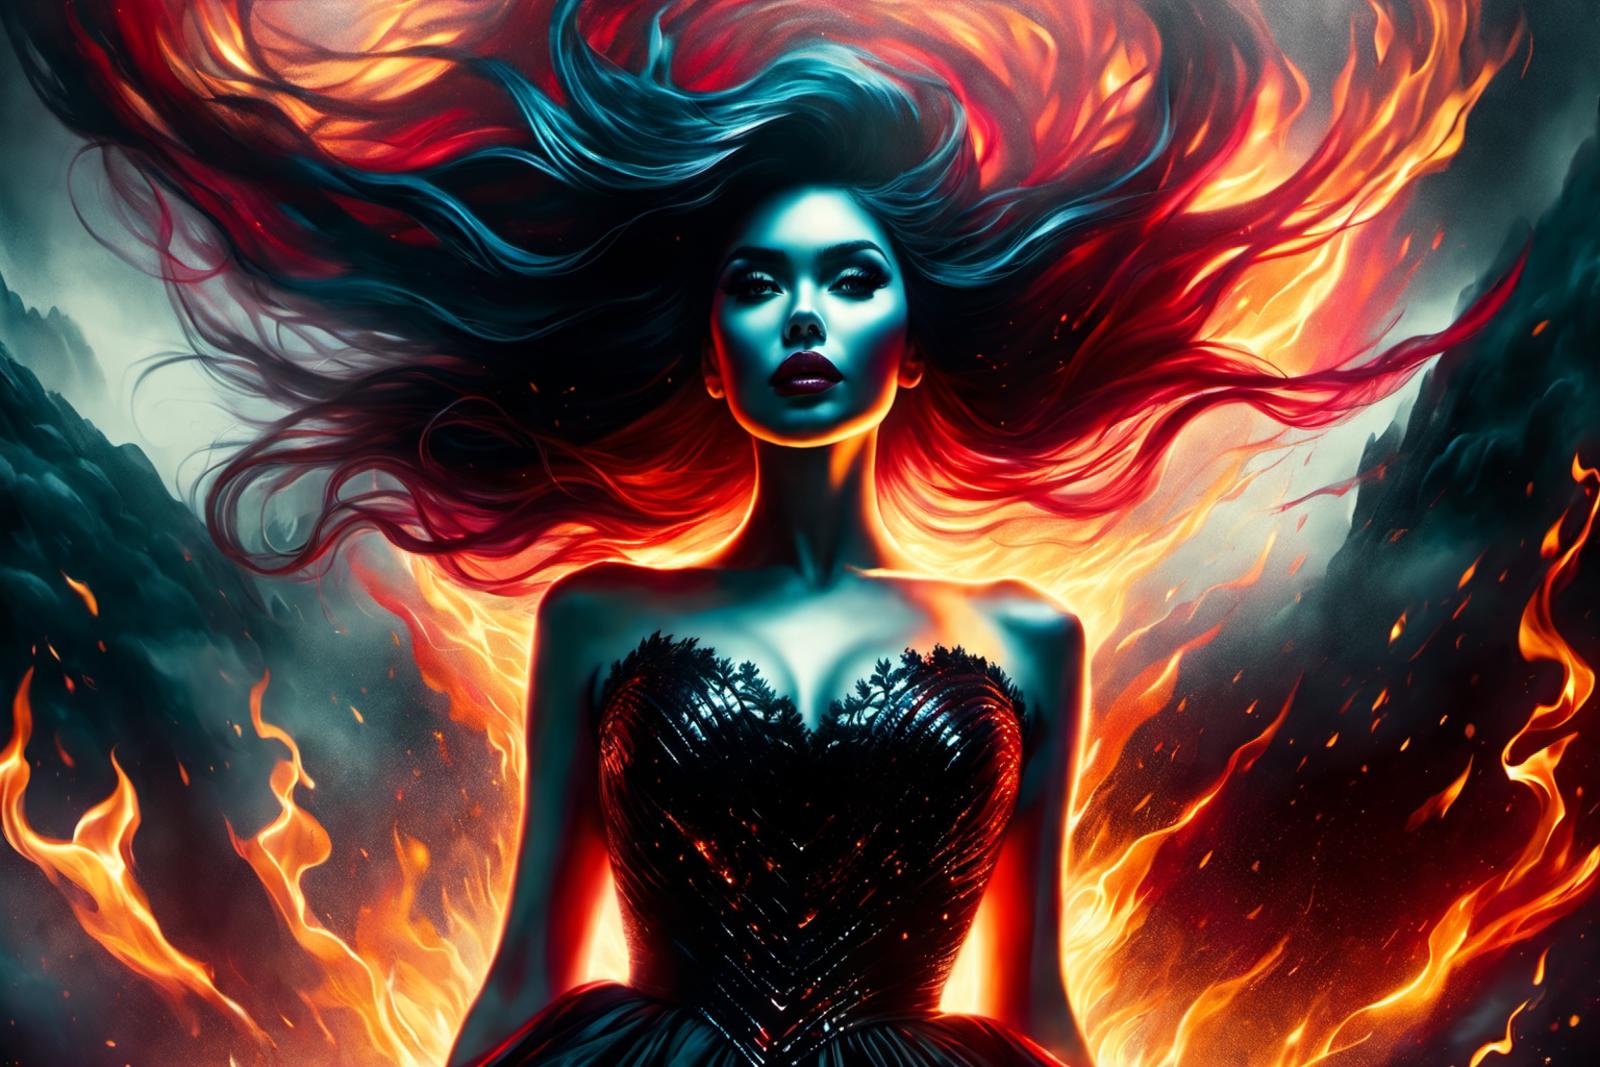 A woman with long dark hair wearing a black dress and red lips in front of a fiery background.